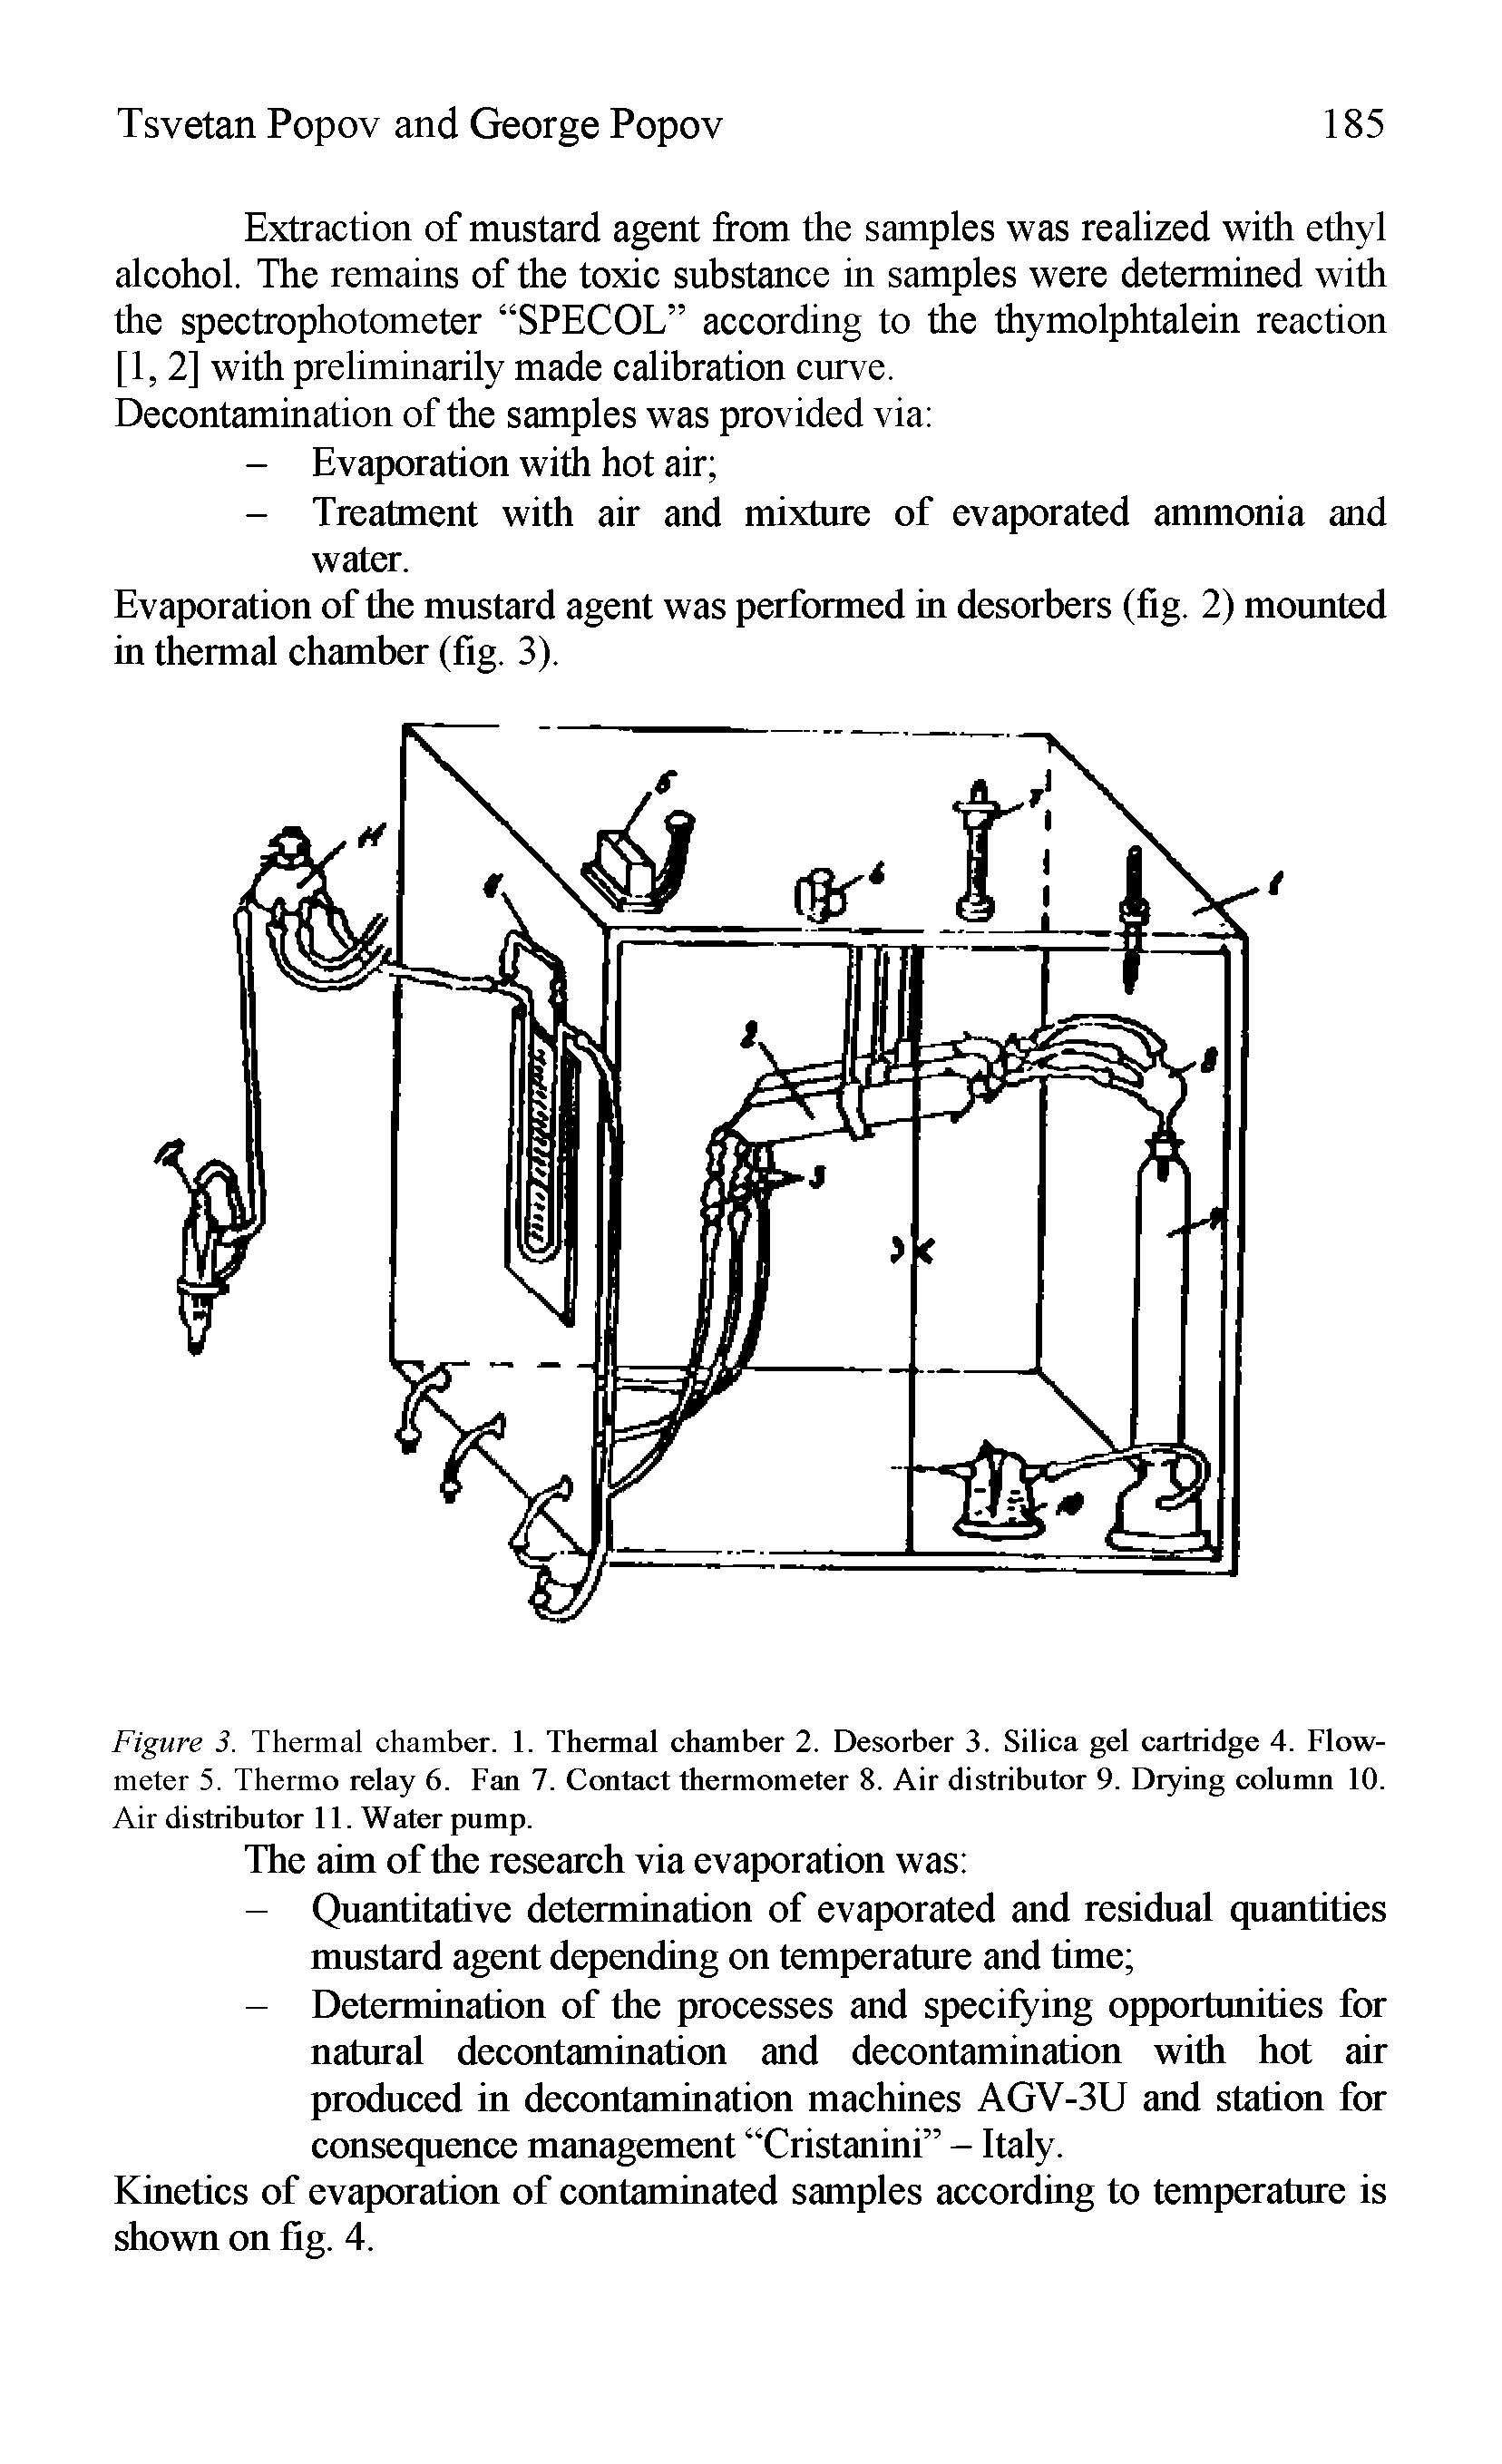 Figure 3. Thermal chamber. 1. Thermal chamber 2. Desorber 3. Silica gel cartridge 4. Flowmeter 5. Thermo relay 6. Fan 7. Contact thermometer 8. Air distributor 9. Drying column 10. Air distributor 11. Water pump.